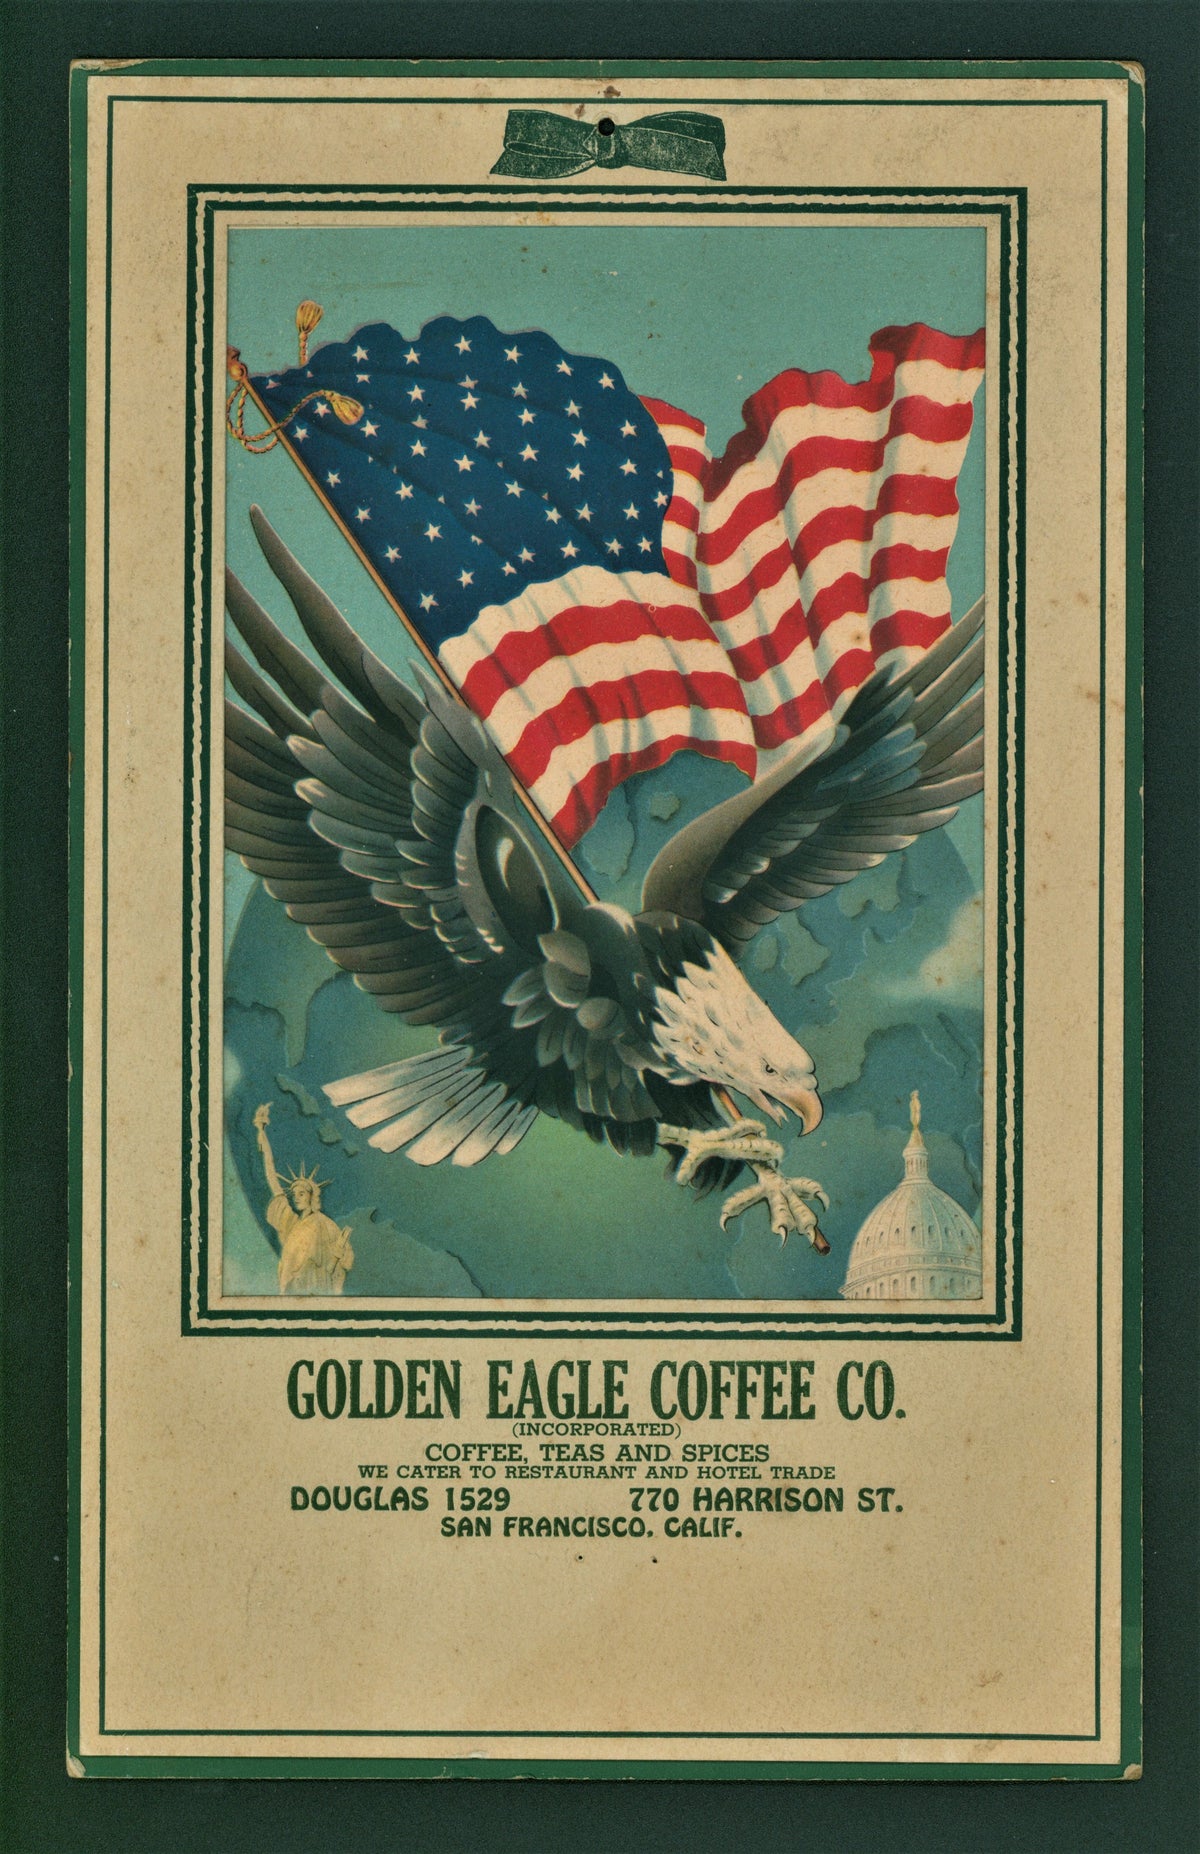 Golden Eagle Coffee Co. (1940s) - Authentic Vintage Window Card